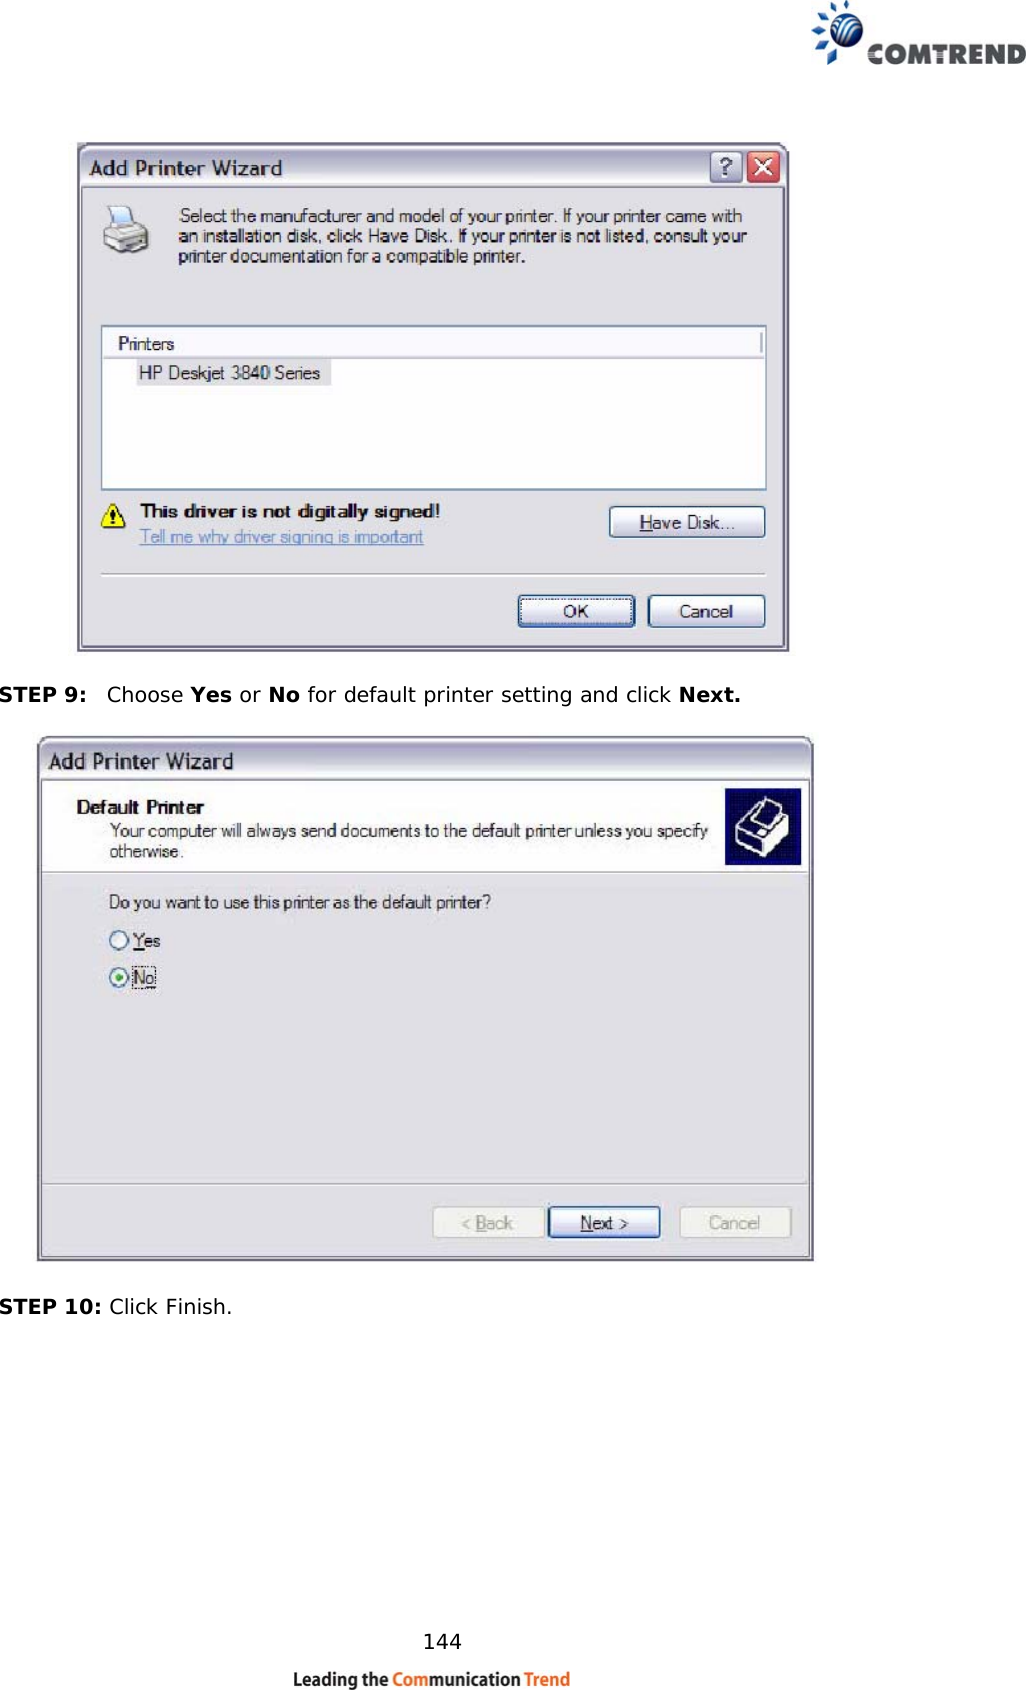    144   STEP 9:  Choose Yes or No for default printer setting and click Next.    STEP 10: Click Finish.         